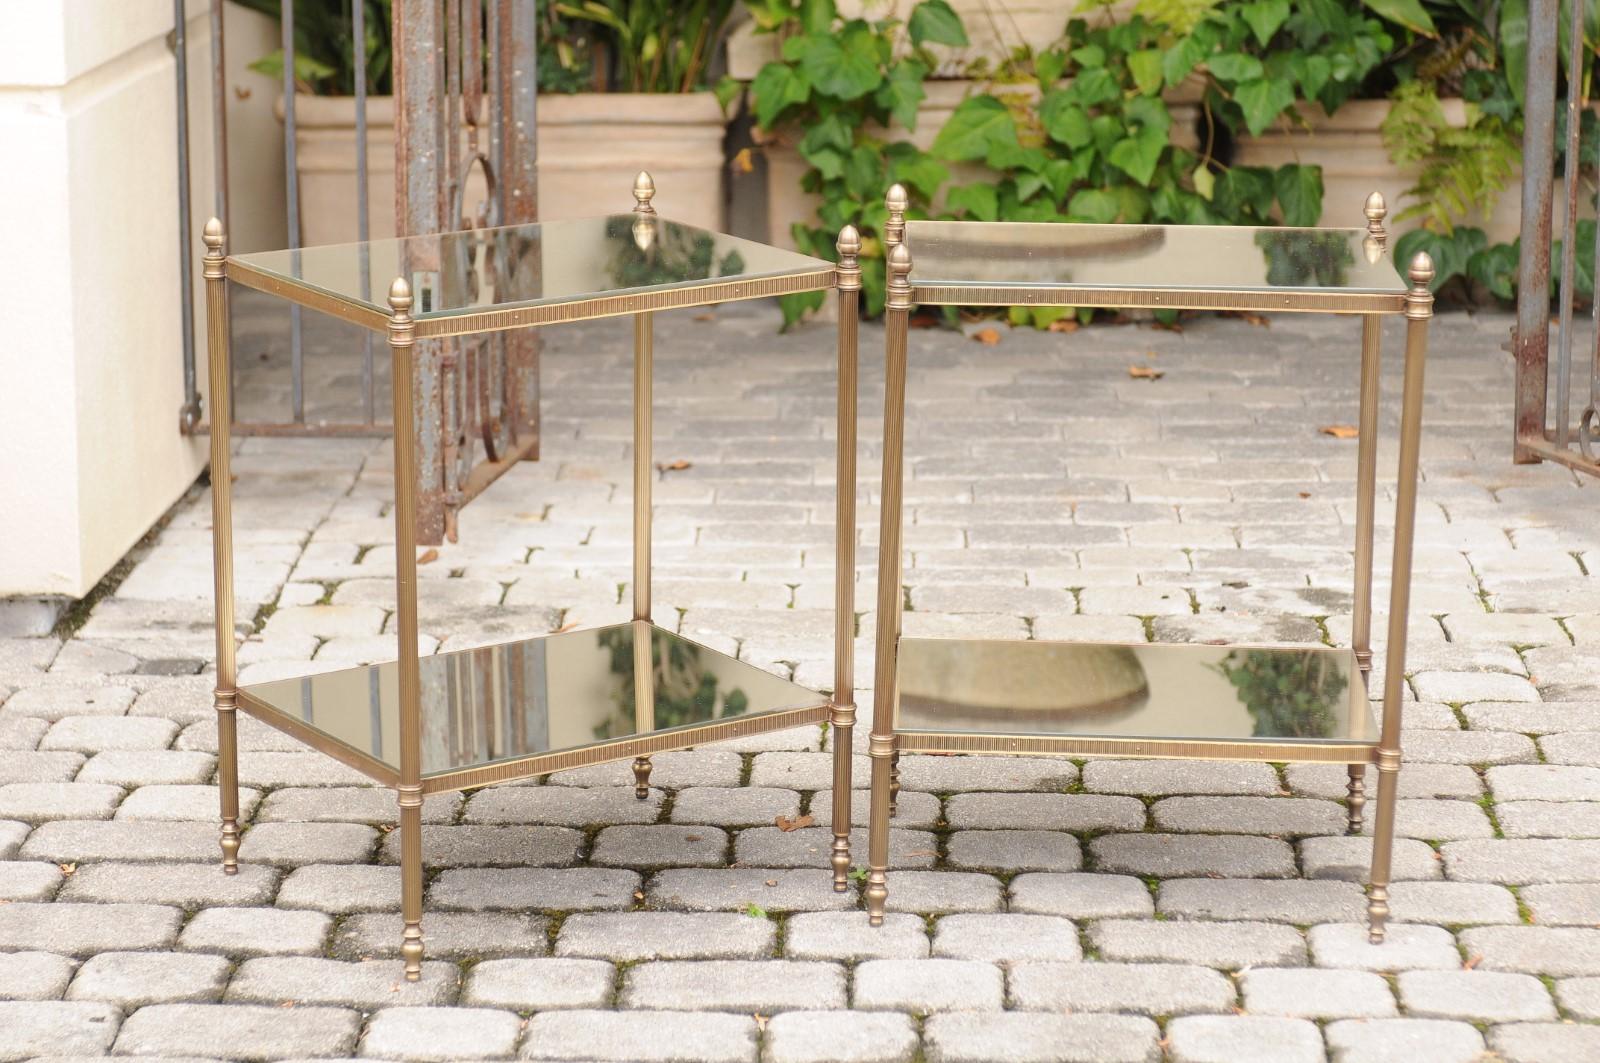 A pair of French or Italian bronze end tables from the mid-20th century, with new distressed mirrored tops and shelves. Each of this pair of end tables features an elegant bronze structure supporting a custom-made distressed mirrored top and lower